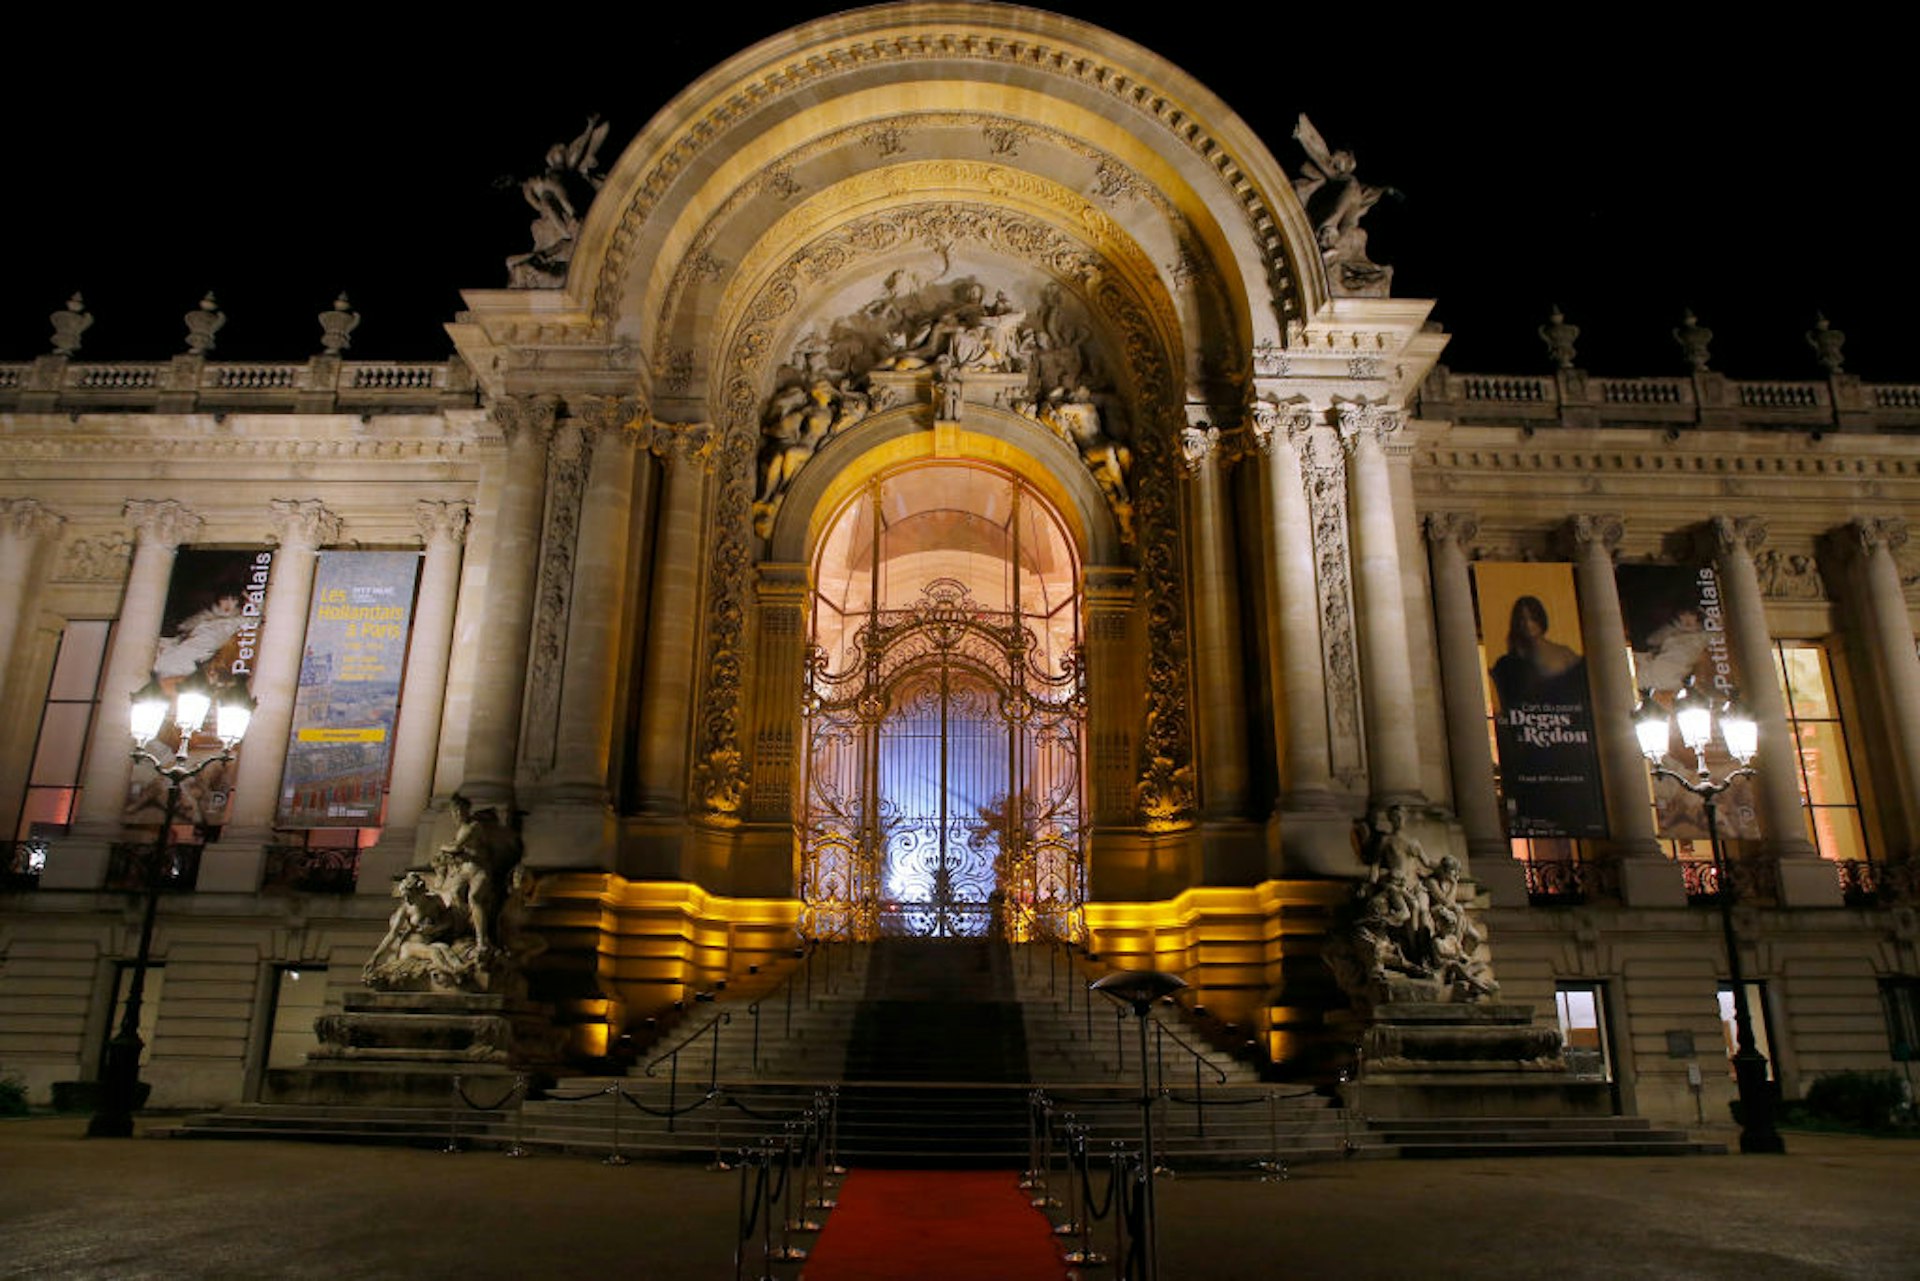 External night-time view of the Petit Palais bathed in lights